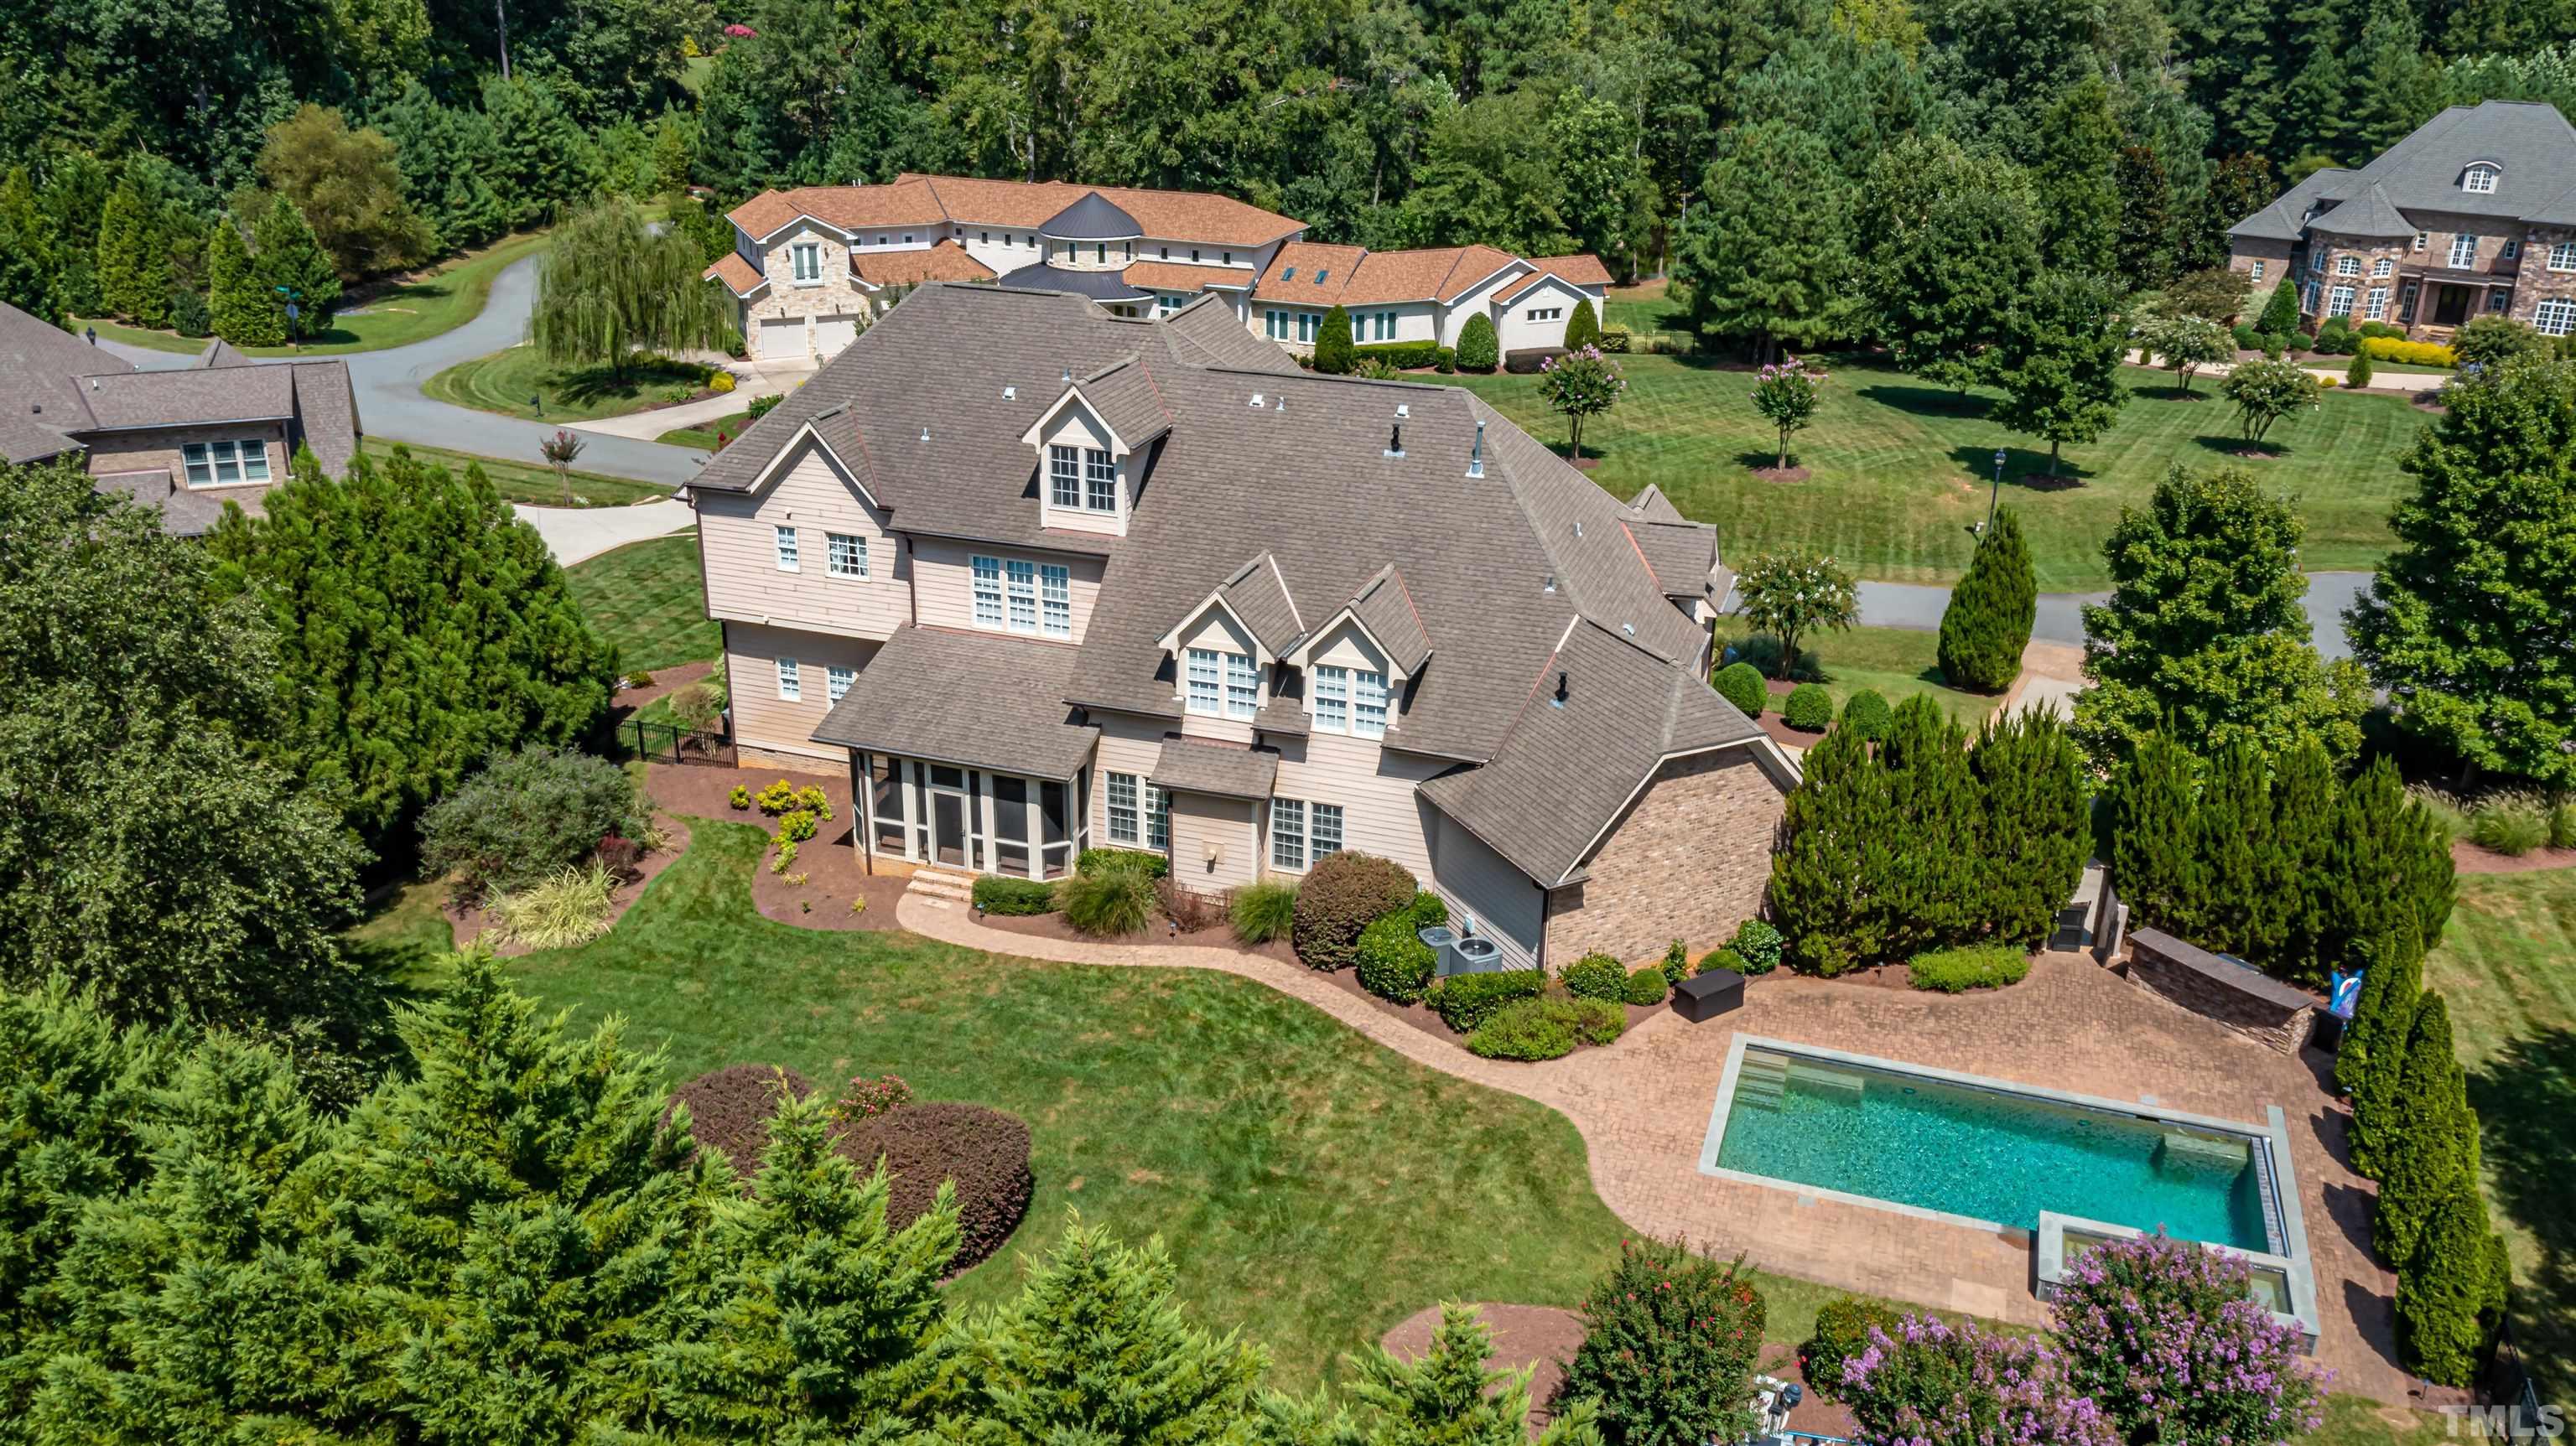 A view of the home from the rear above...nestled amongst homes of similar caliber in a private gated community.